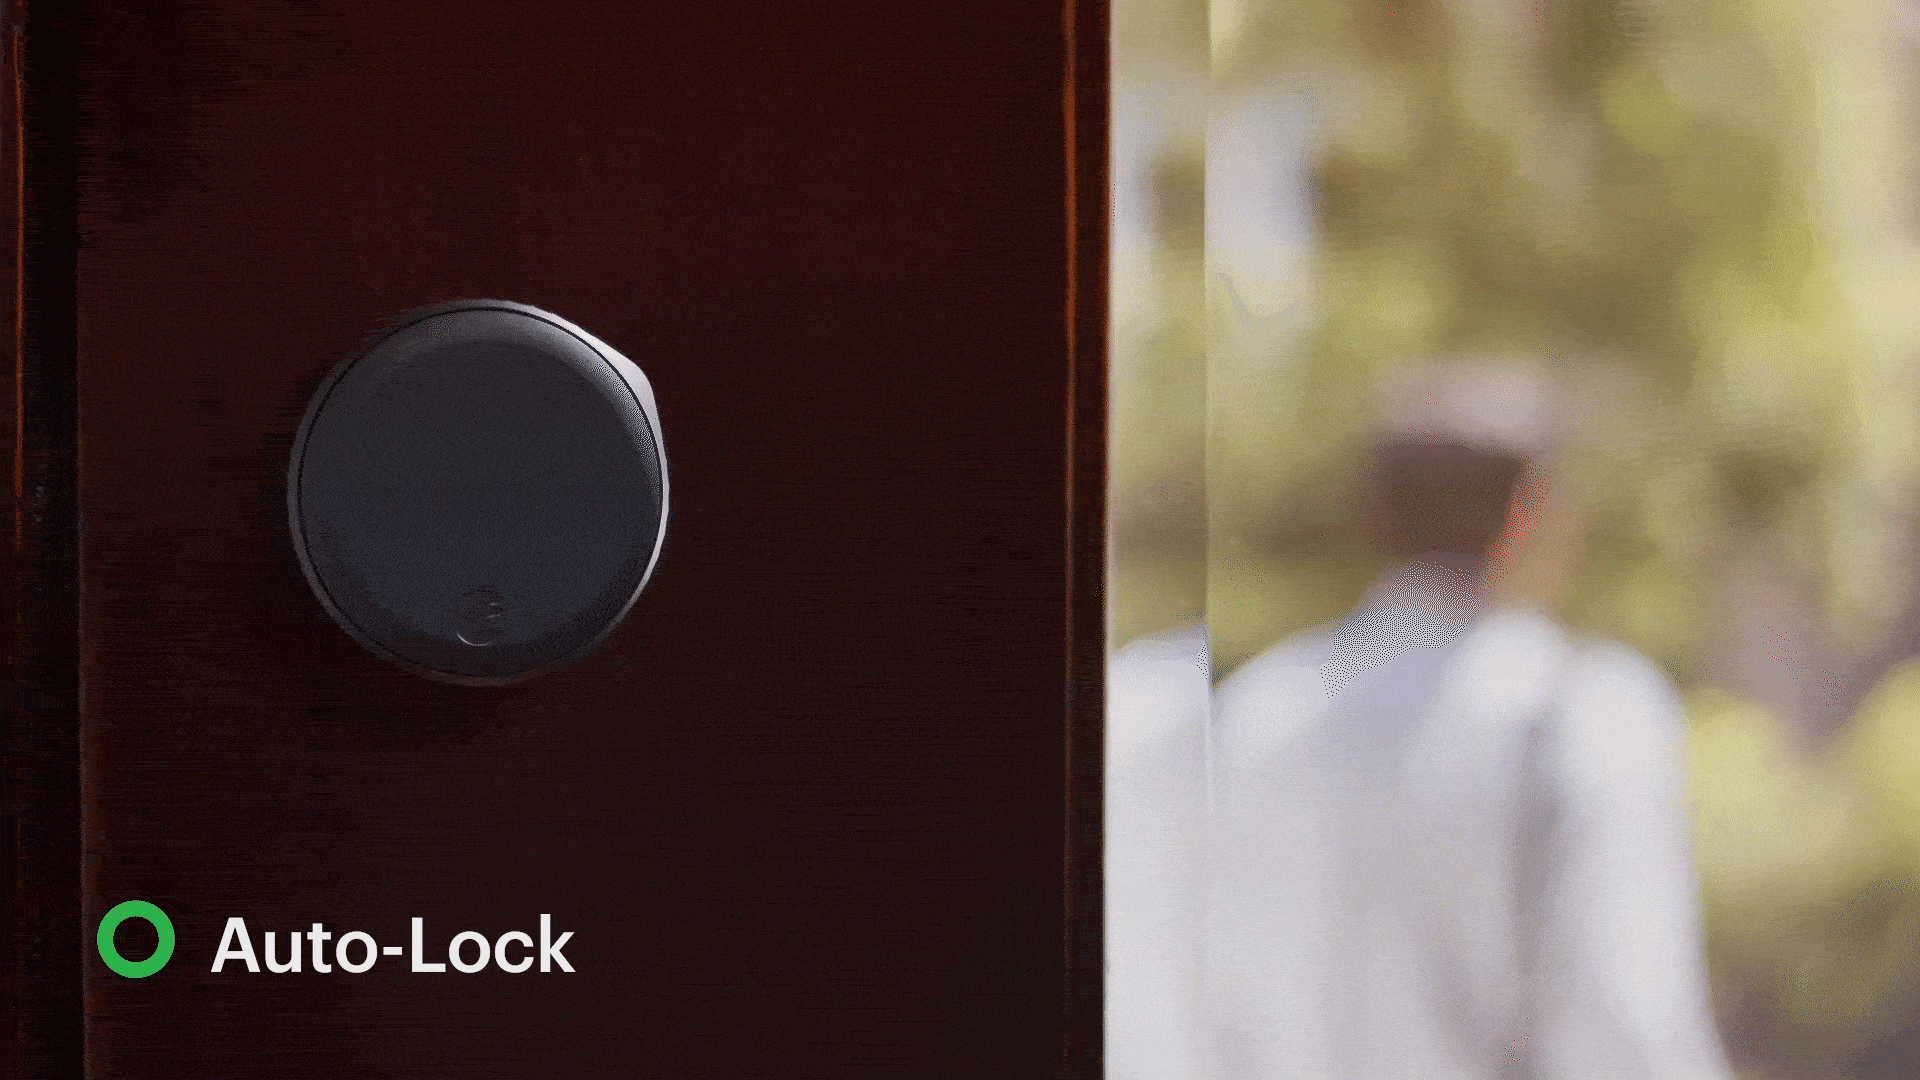 Auto-lock when man leaves home